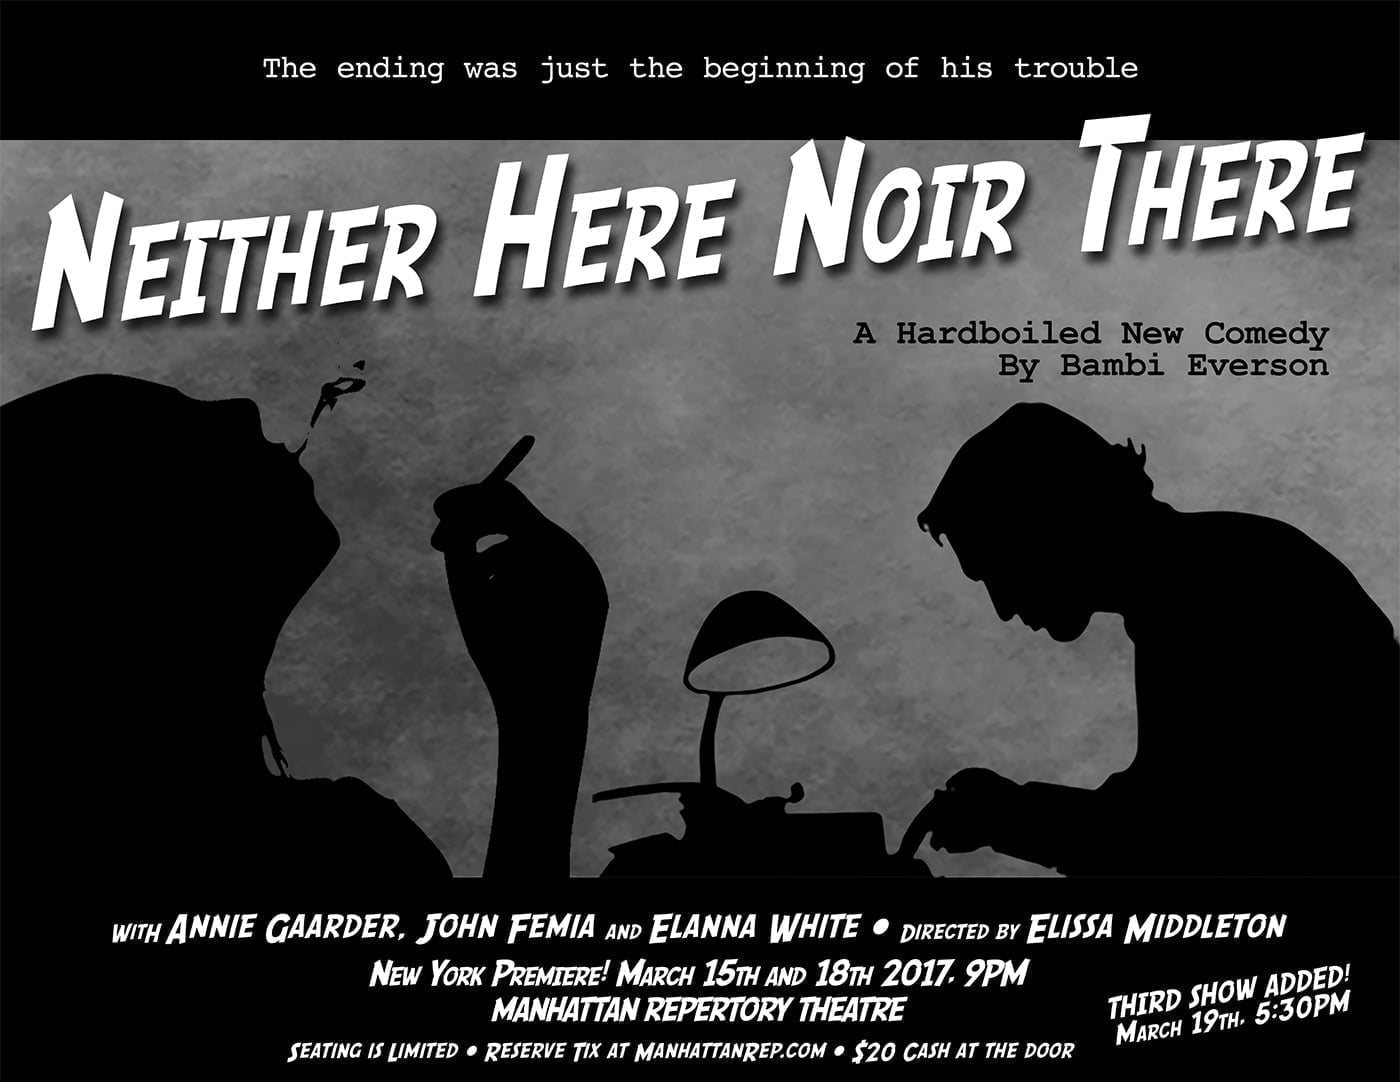 Neither Here, Noir There by Bambi Everson